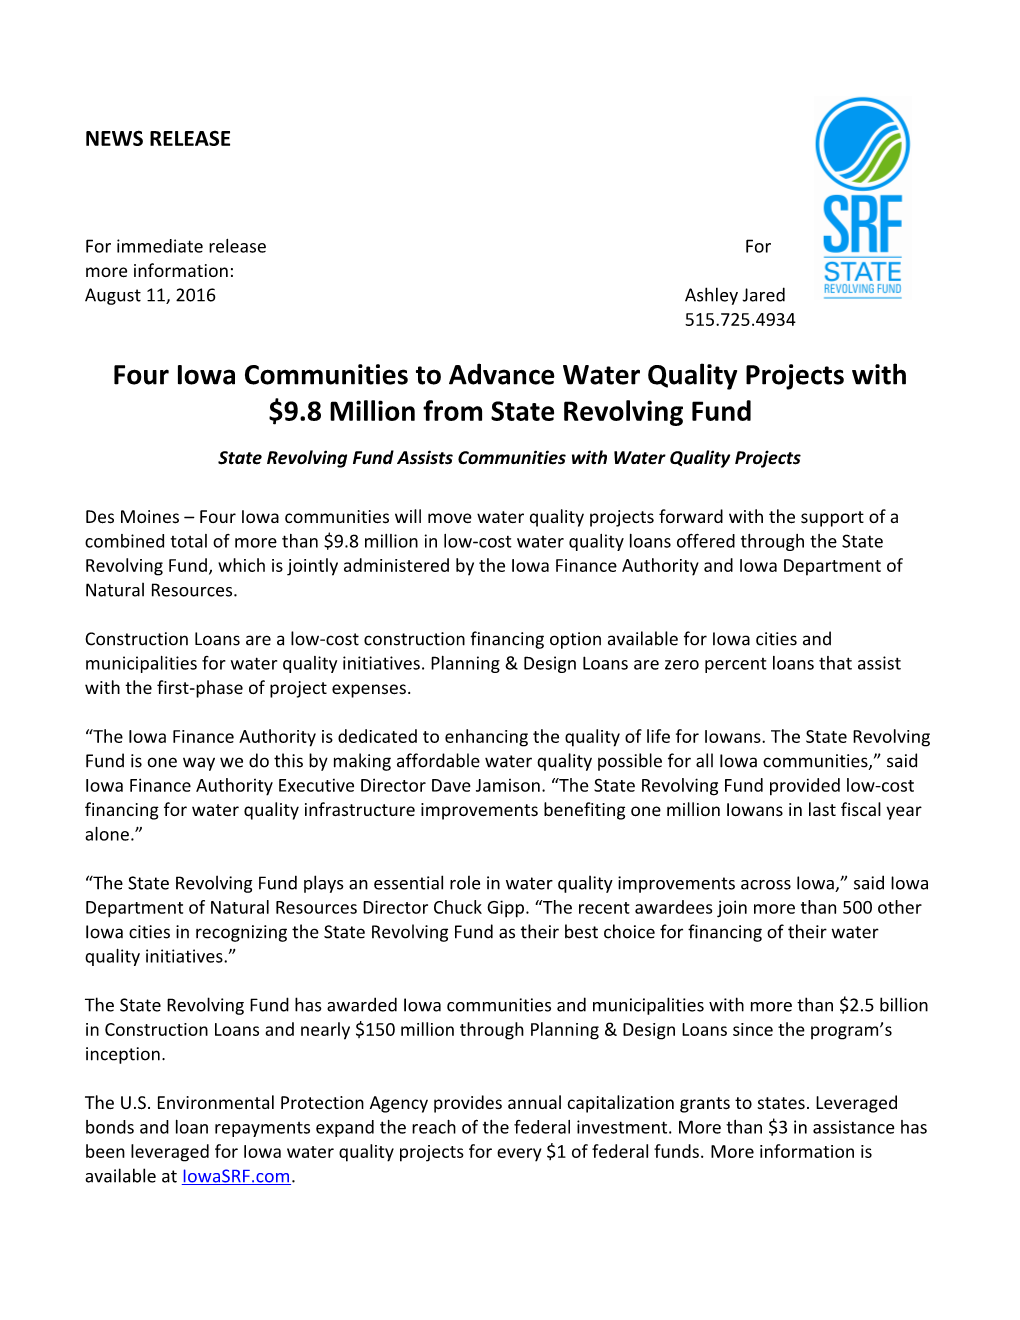 Fouriowa Communities to Advance Water Quality Projects with $9.8 Million Fromstate Revolving